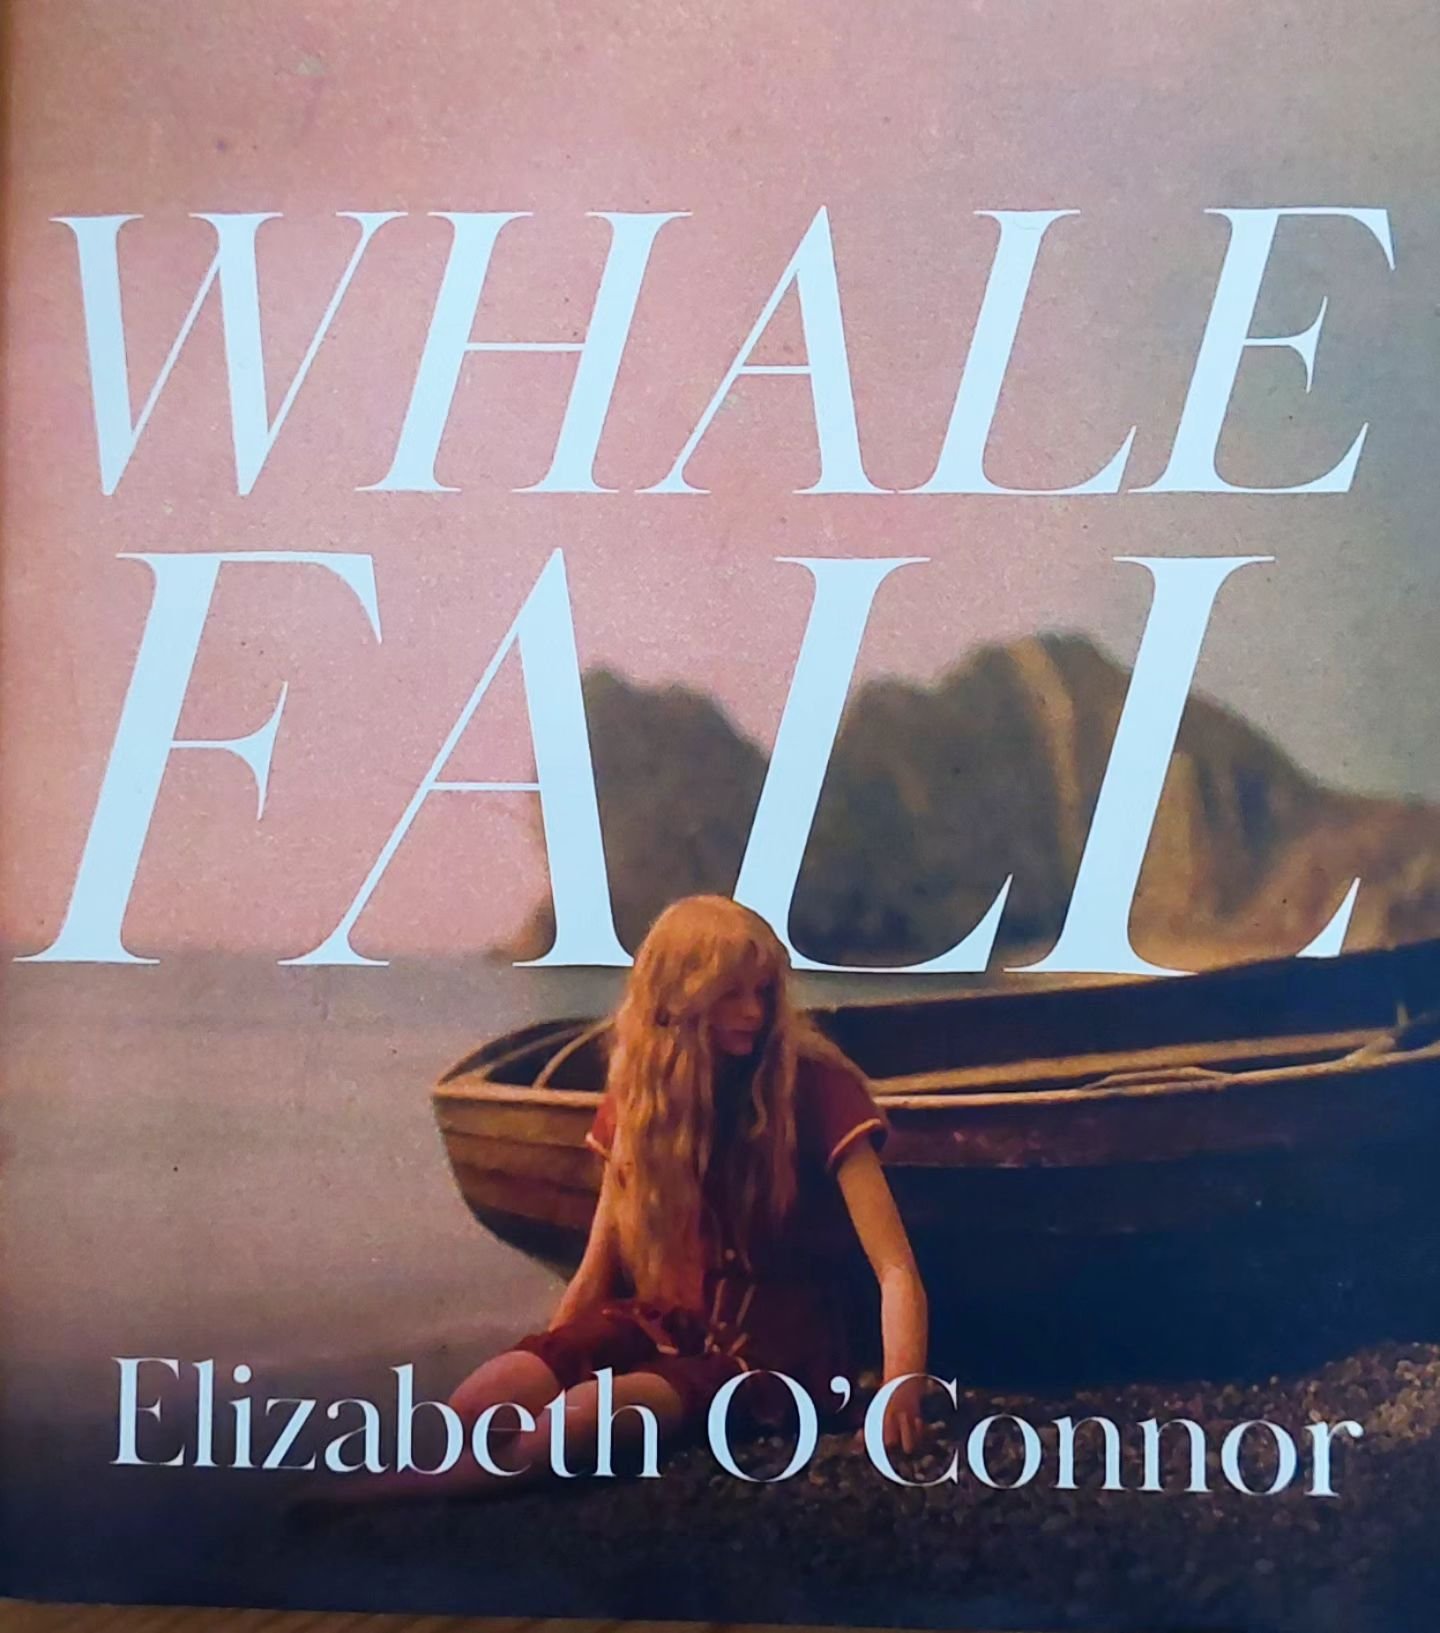 Had the very great pleasure of meeting @elizabethroconnor at @bookabookshop last week, where she was talking about her glorious debut, #WhaleFall. What a novel! I finished it last night and was left gasping with admiration. So incisive, so beautiful 